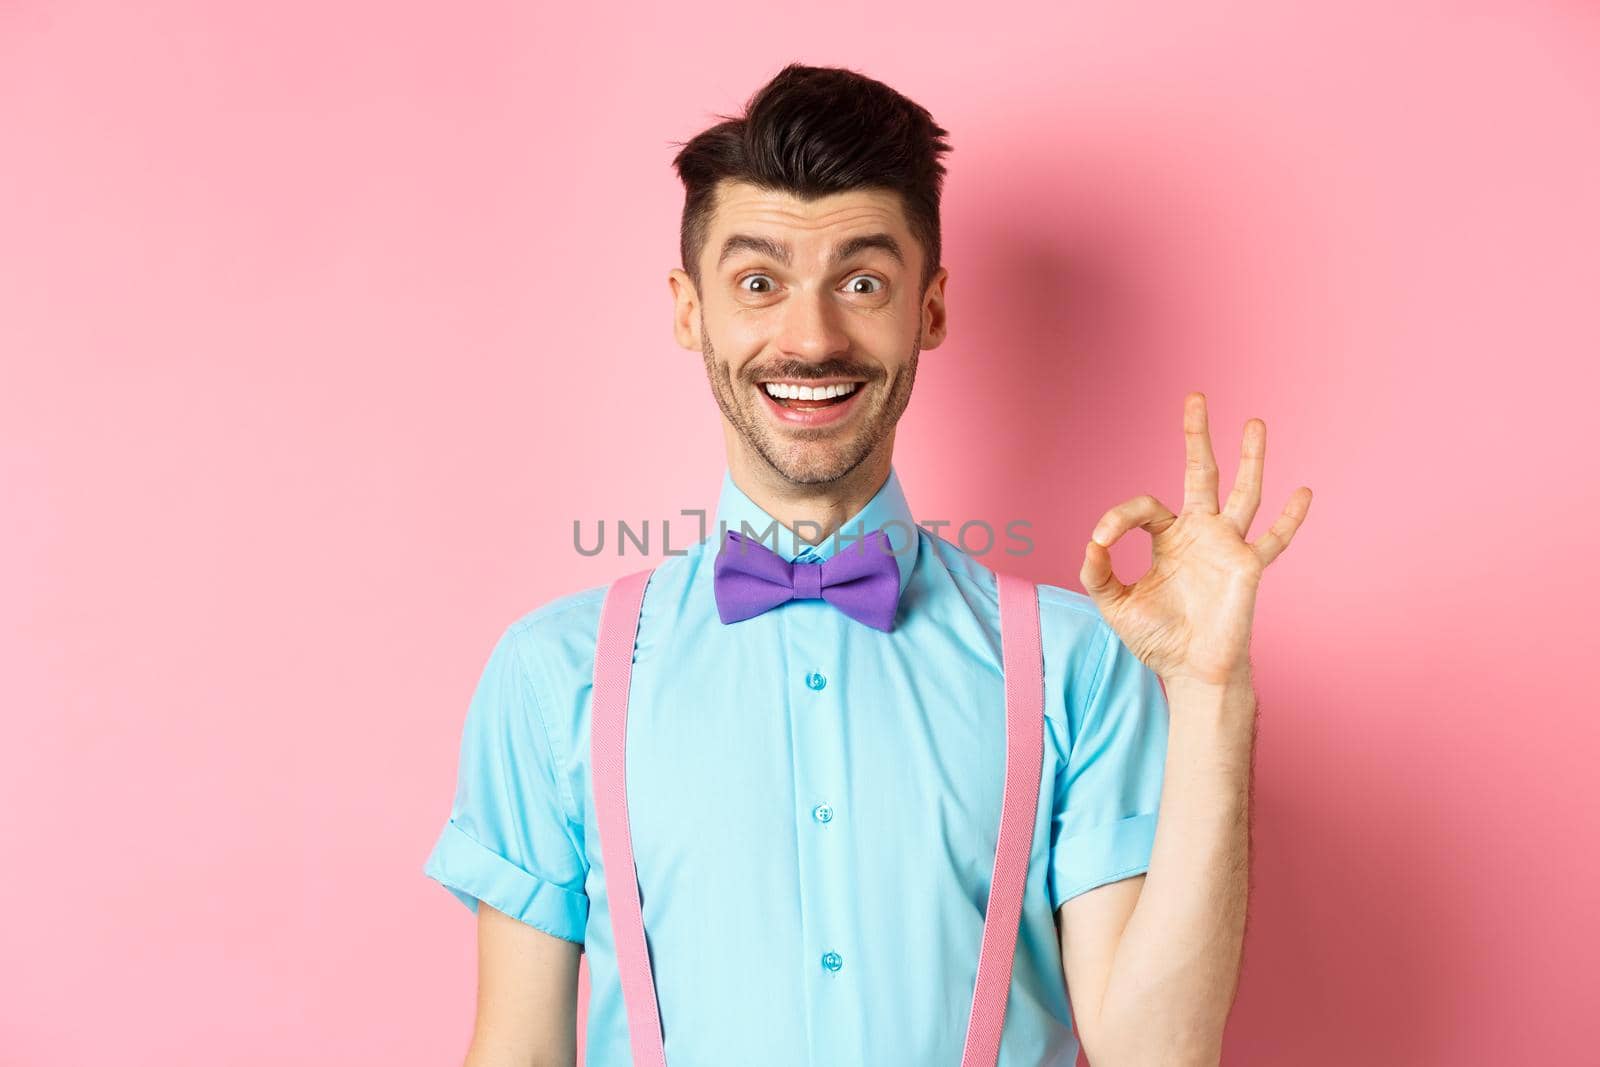 Handsome caucasian man with moustache smiling and showing okay sign, approve something good, praising excellent choice, standing amused on pink background.